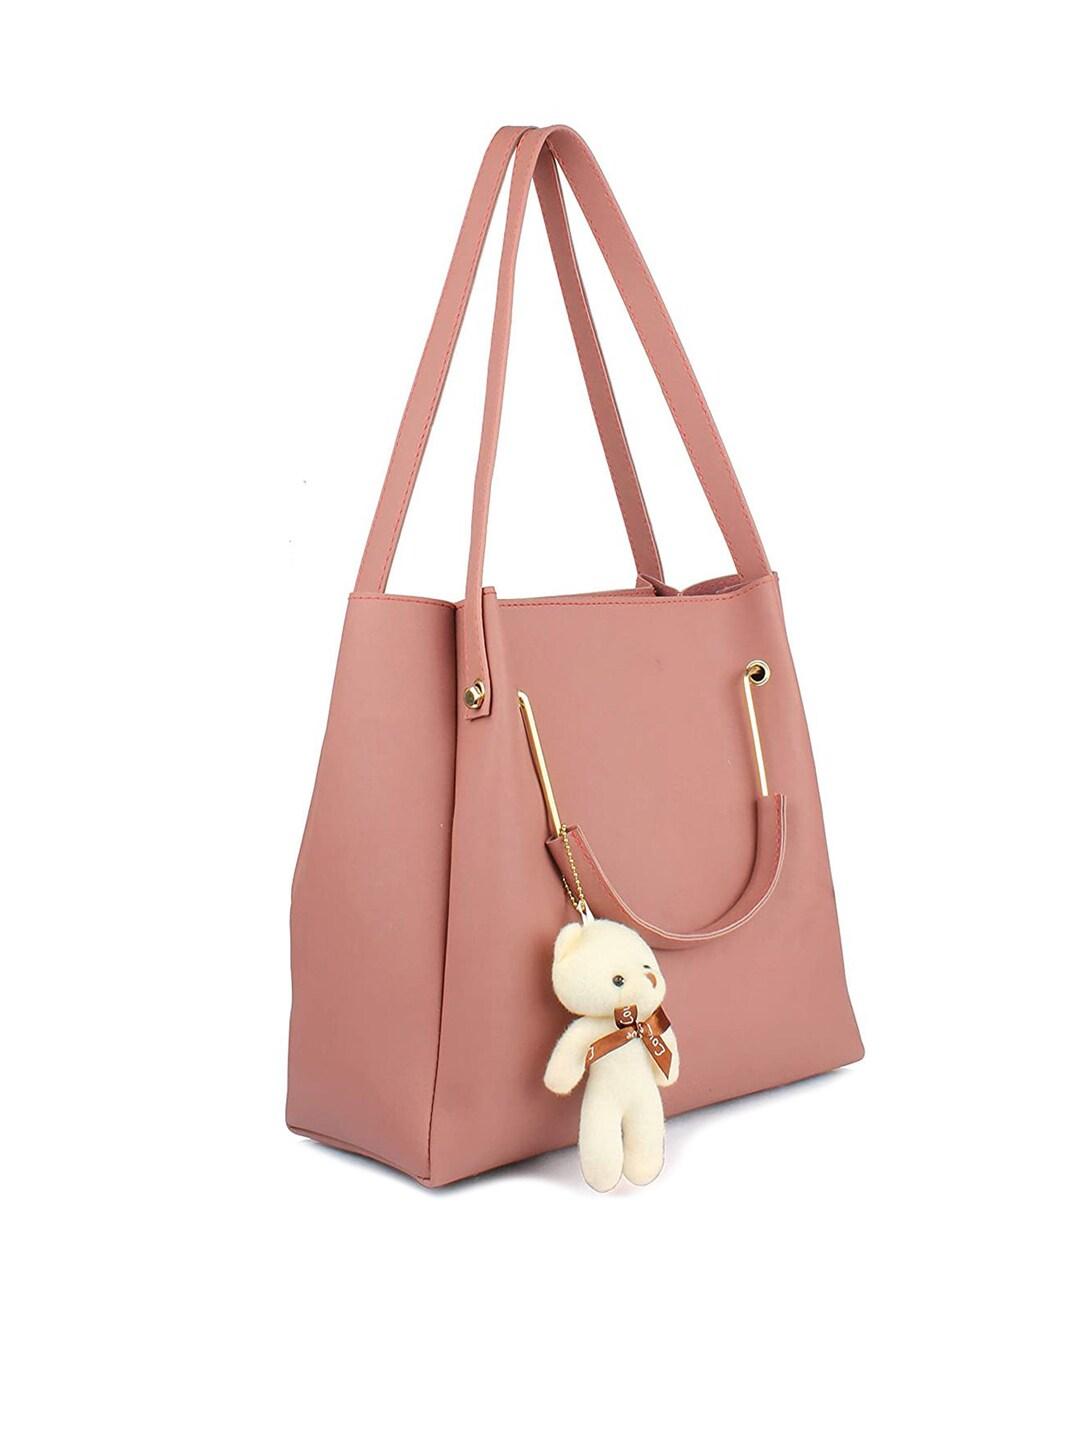 Style Shoes Pink Structured Handheld Bag with Tasselled